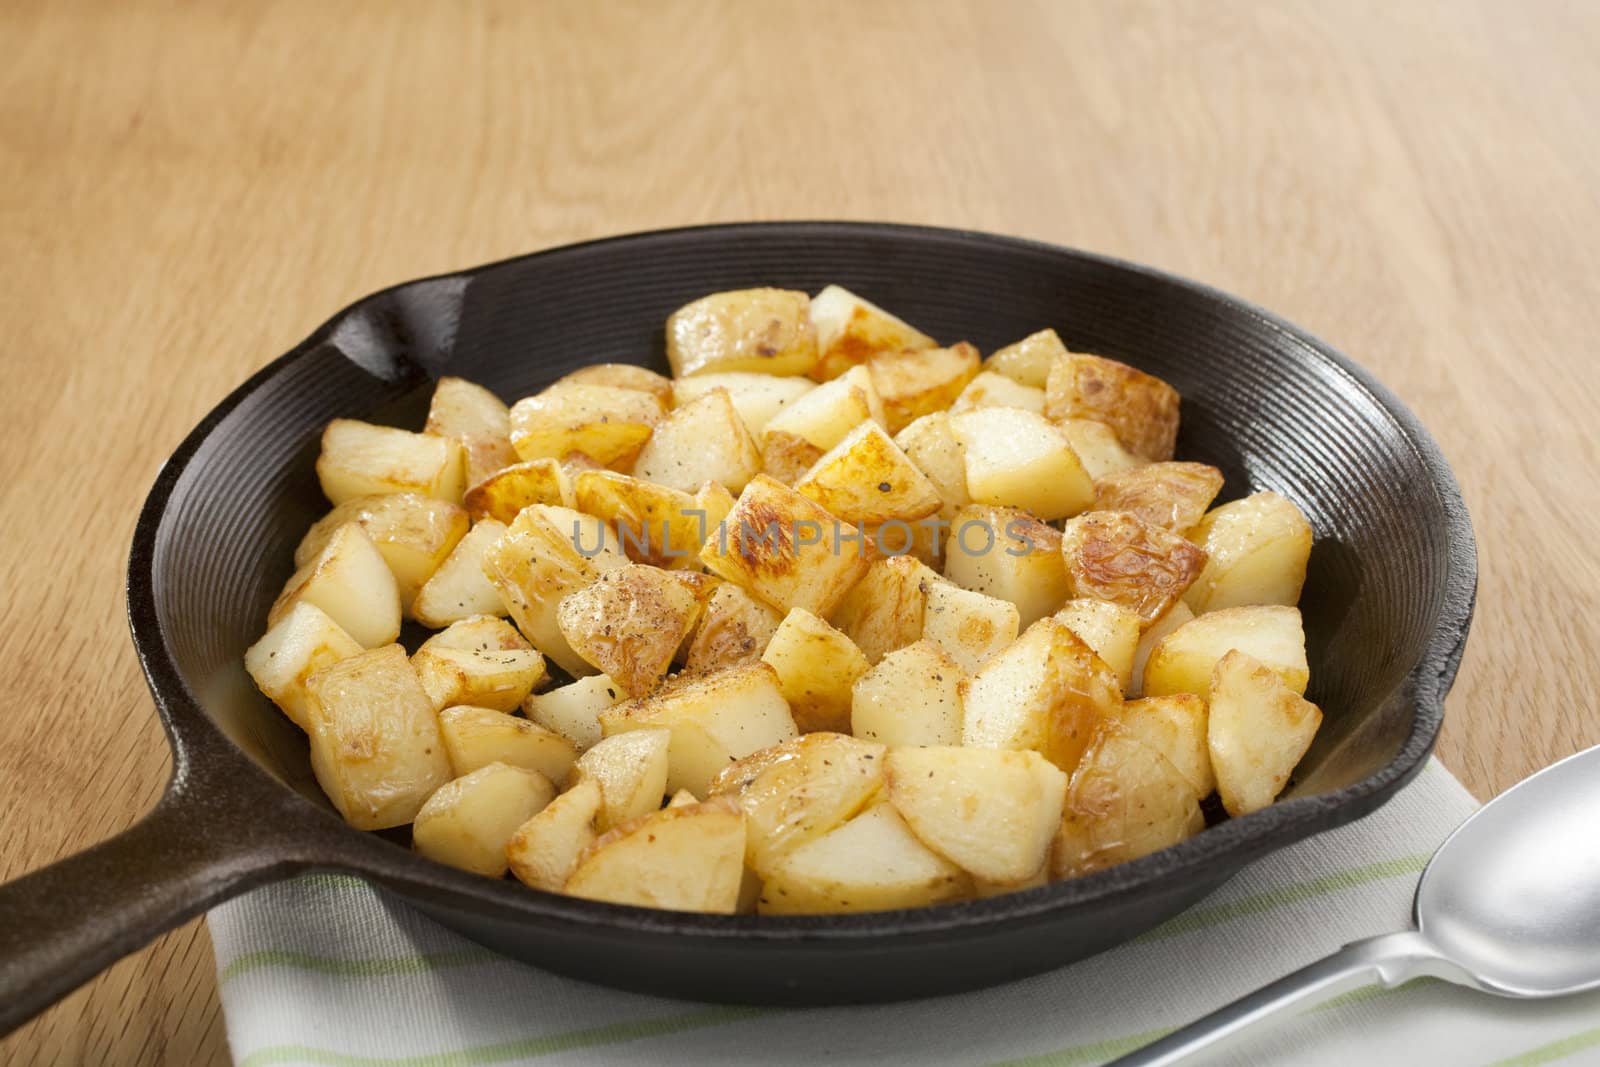 A small cast iron skillet or frying pan filled with home fries or saute potatoes.